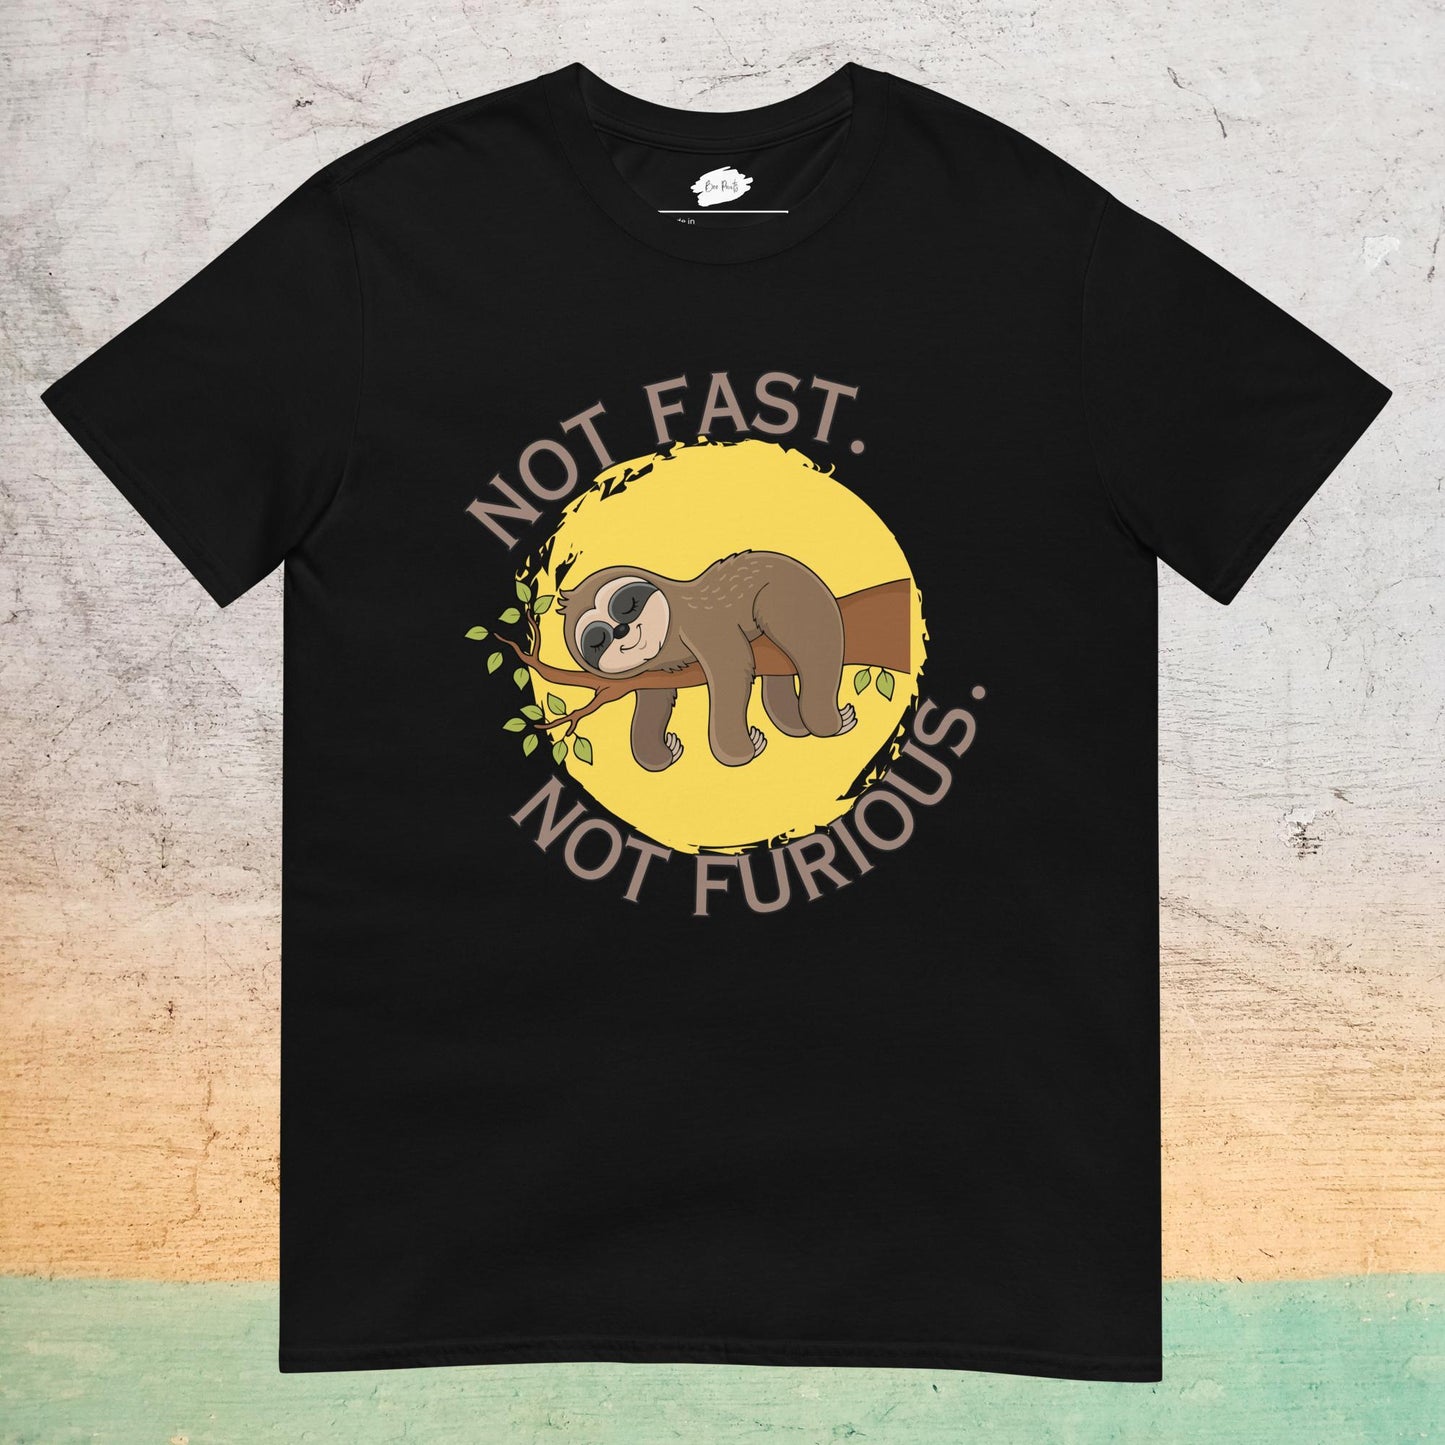 Essential Crew T-Shirt - Not Fast Not Furious |  | Bee Prints